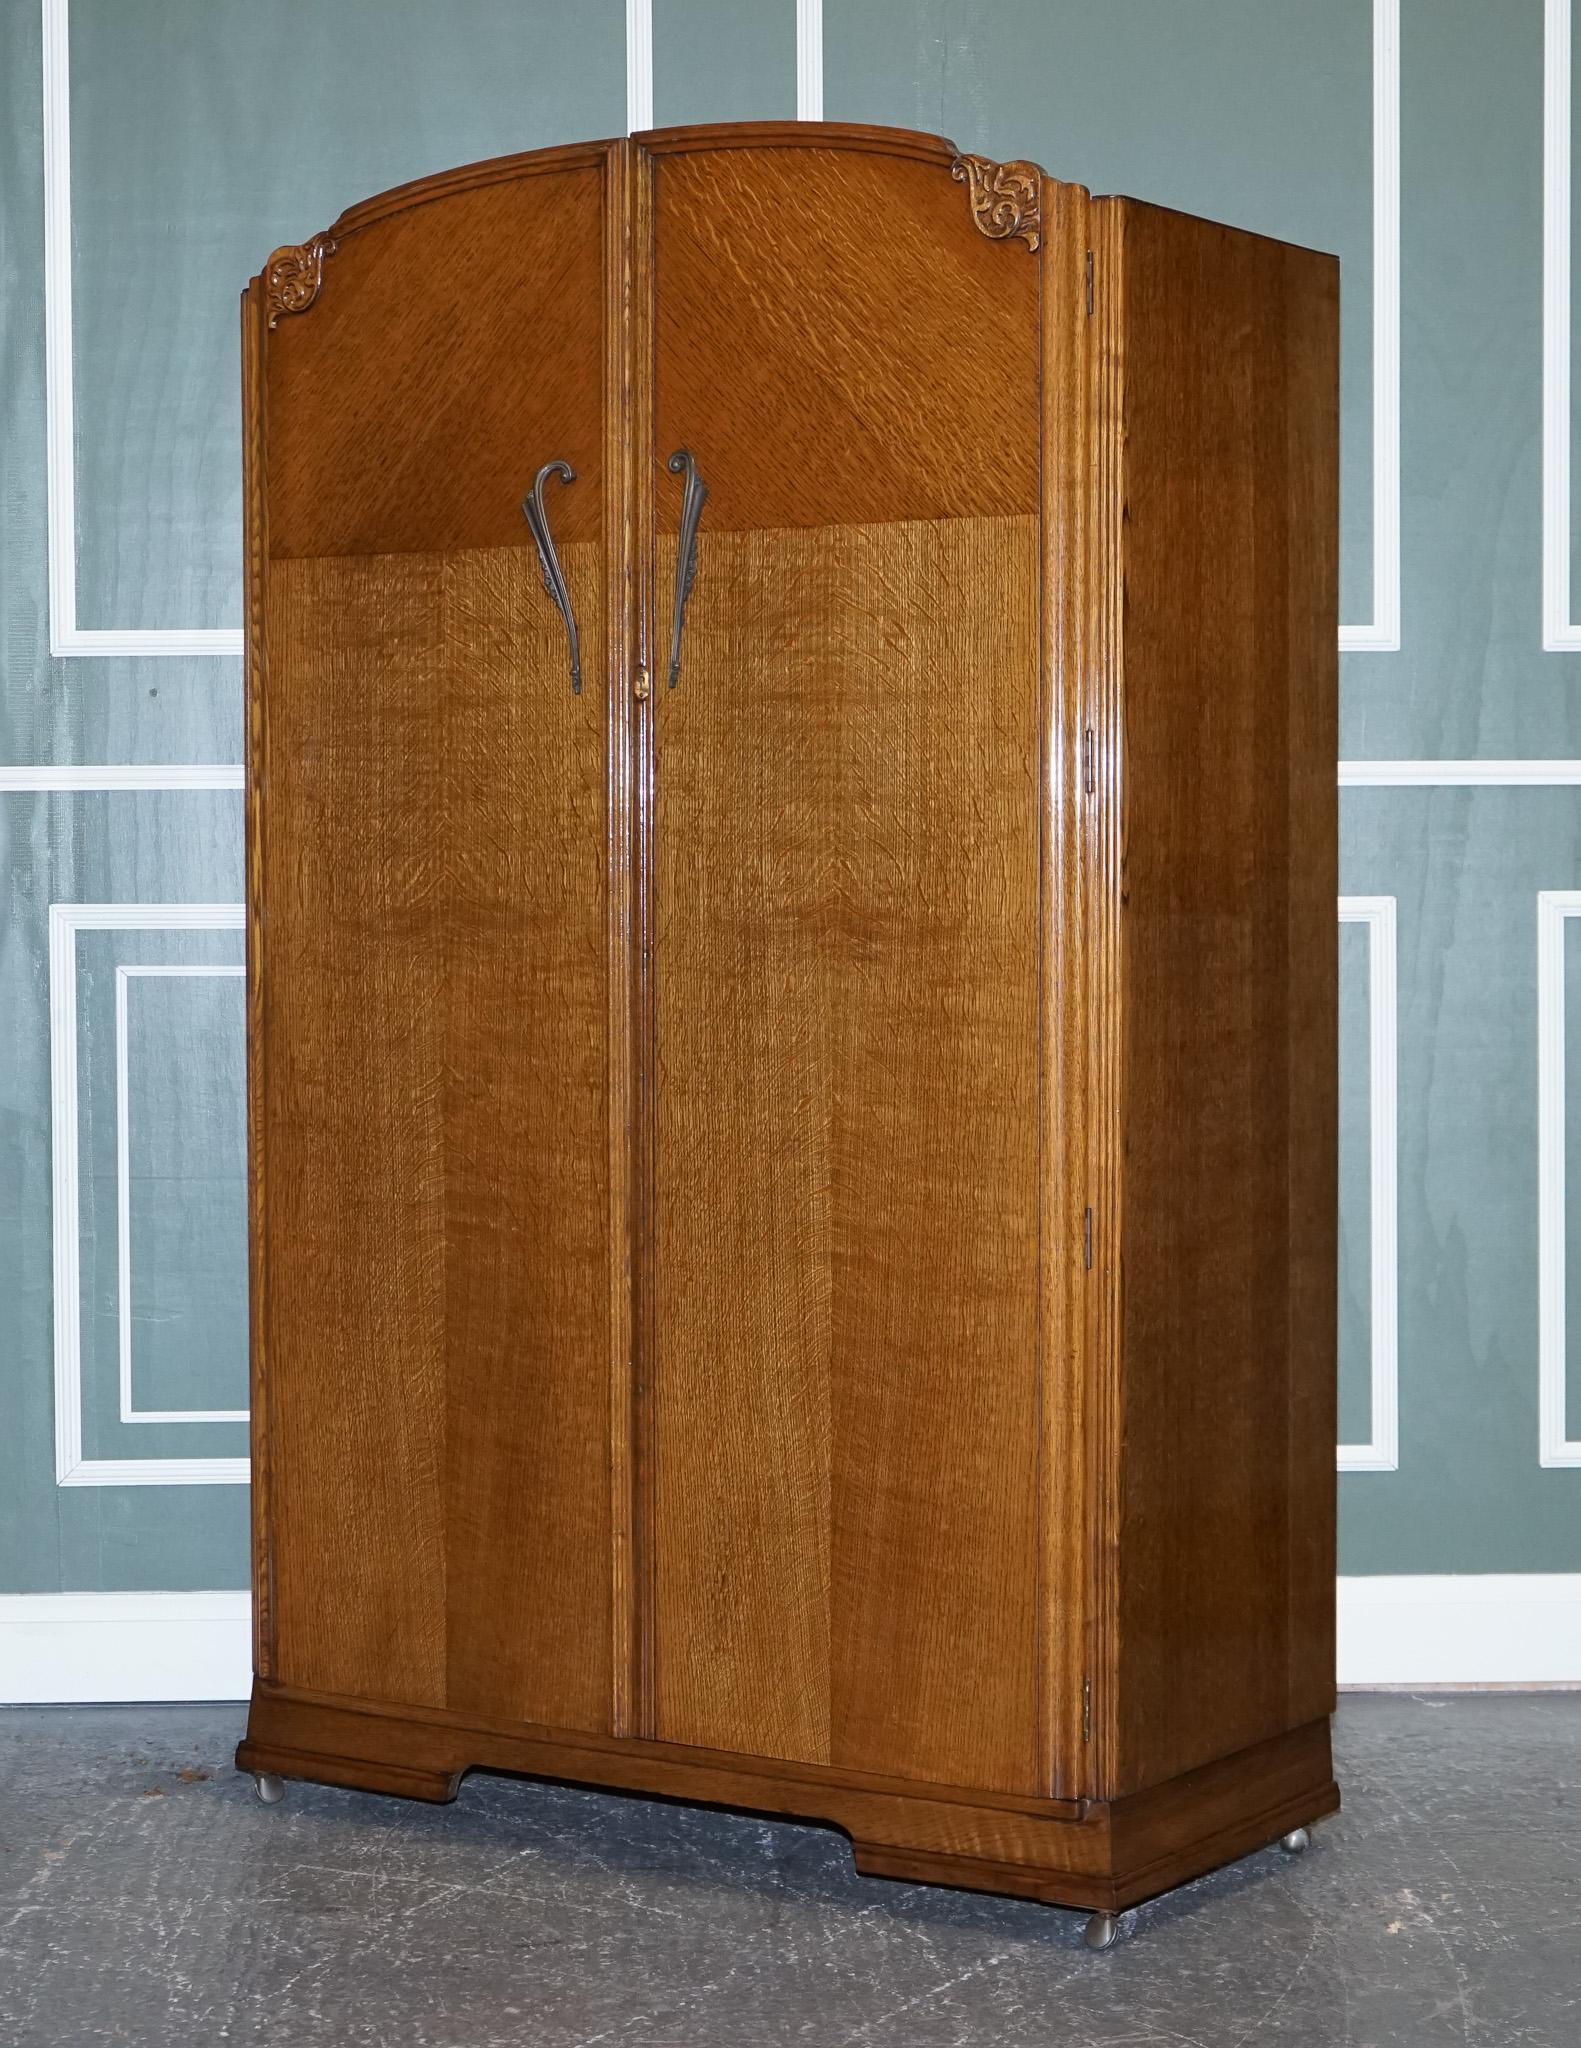 We are excited to offer for sale a large vintage art deco oak two-door wardrobe.

An art deco wardrobe made from oak.
It is lifted on castors which makes it easy to move if needed.
On the inside, it's designed to hang clothes with a little space